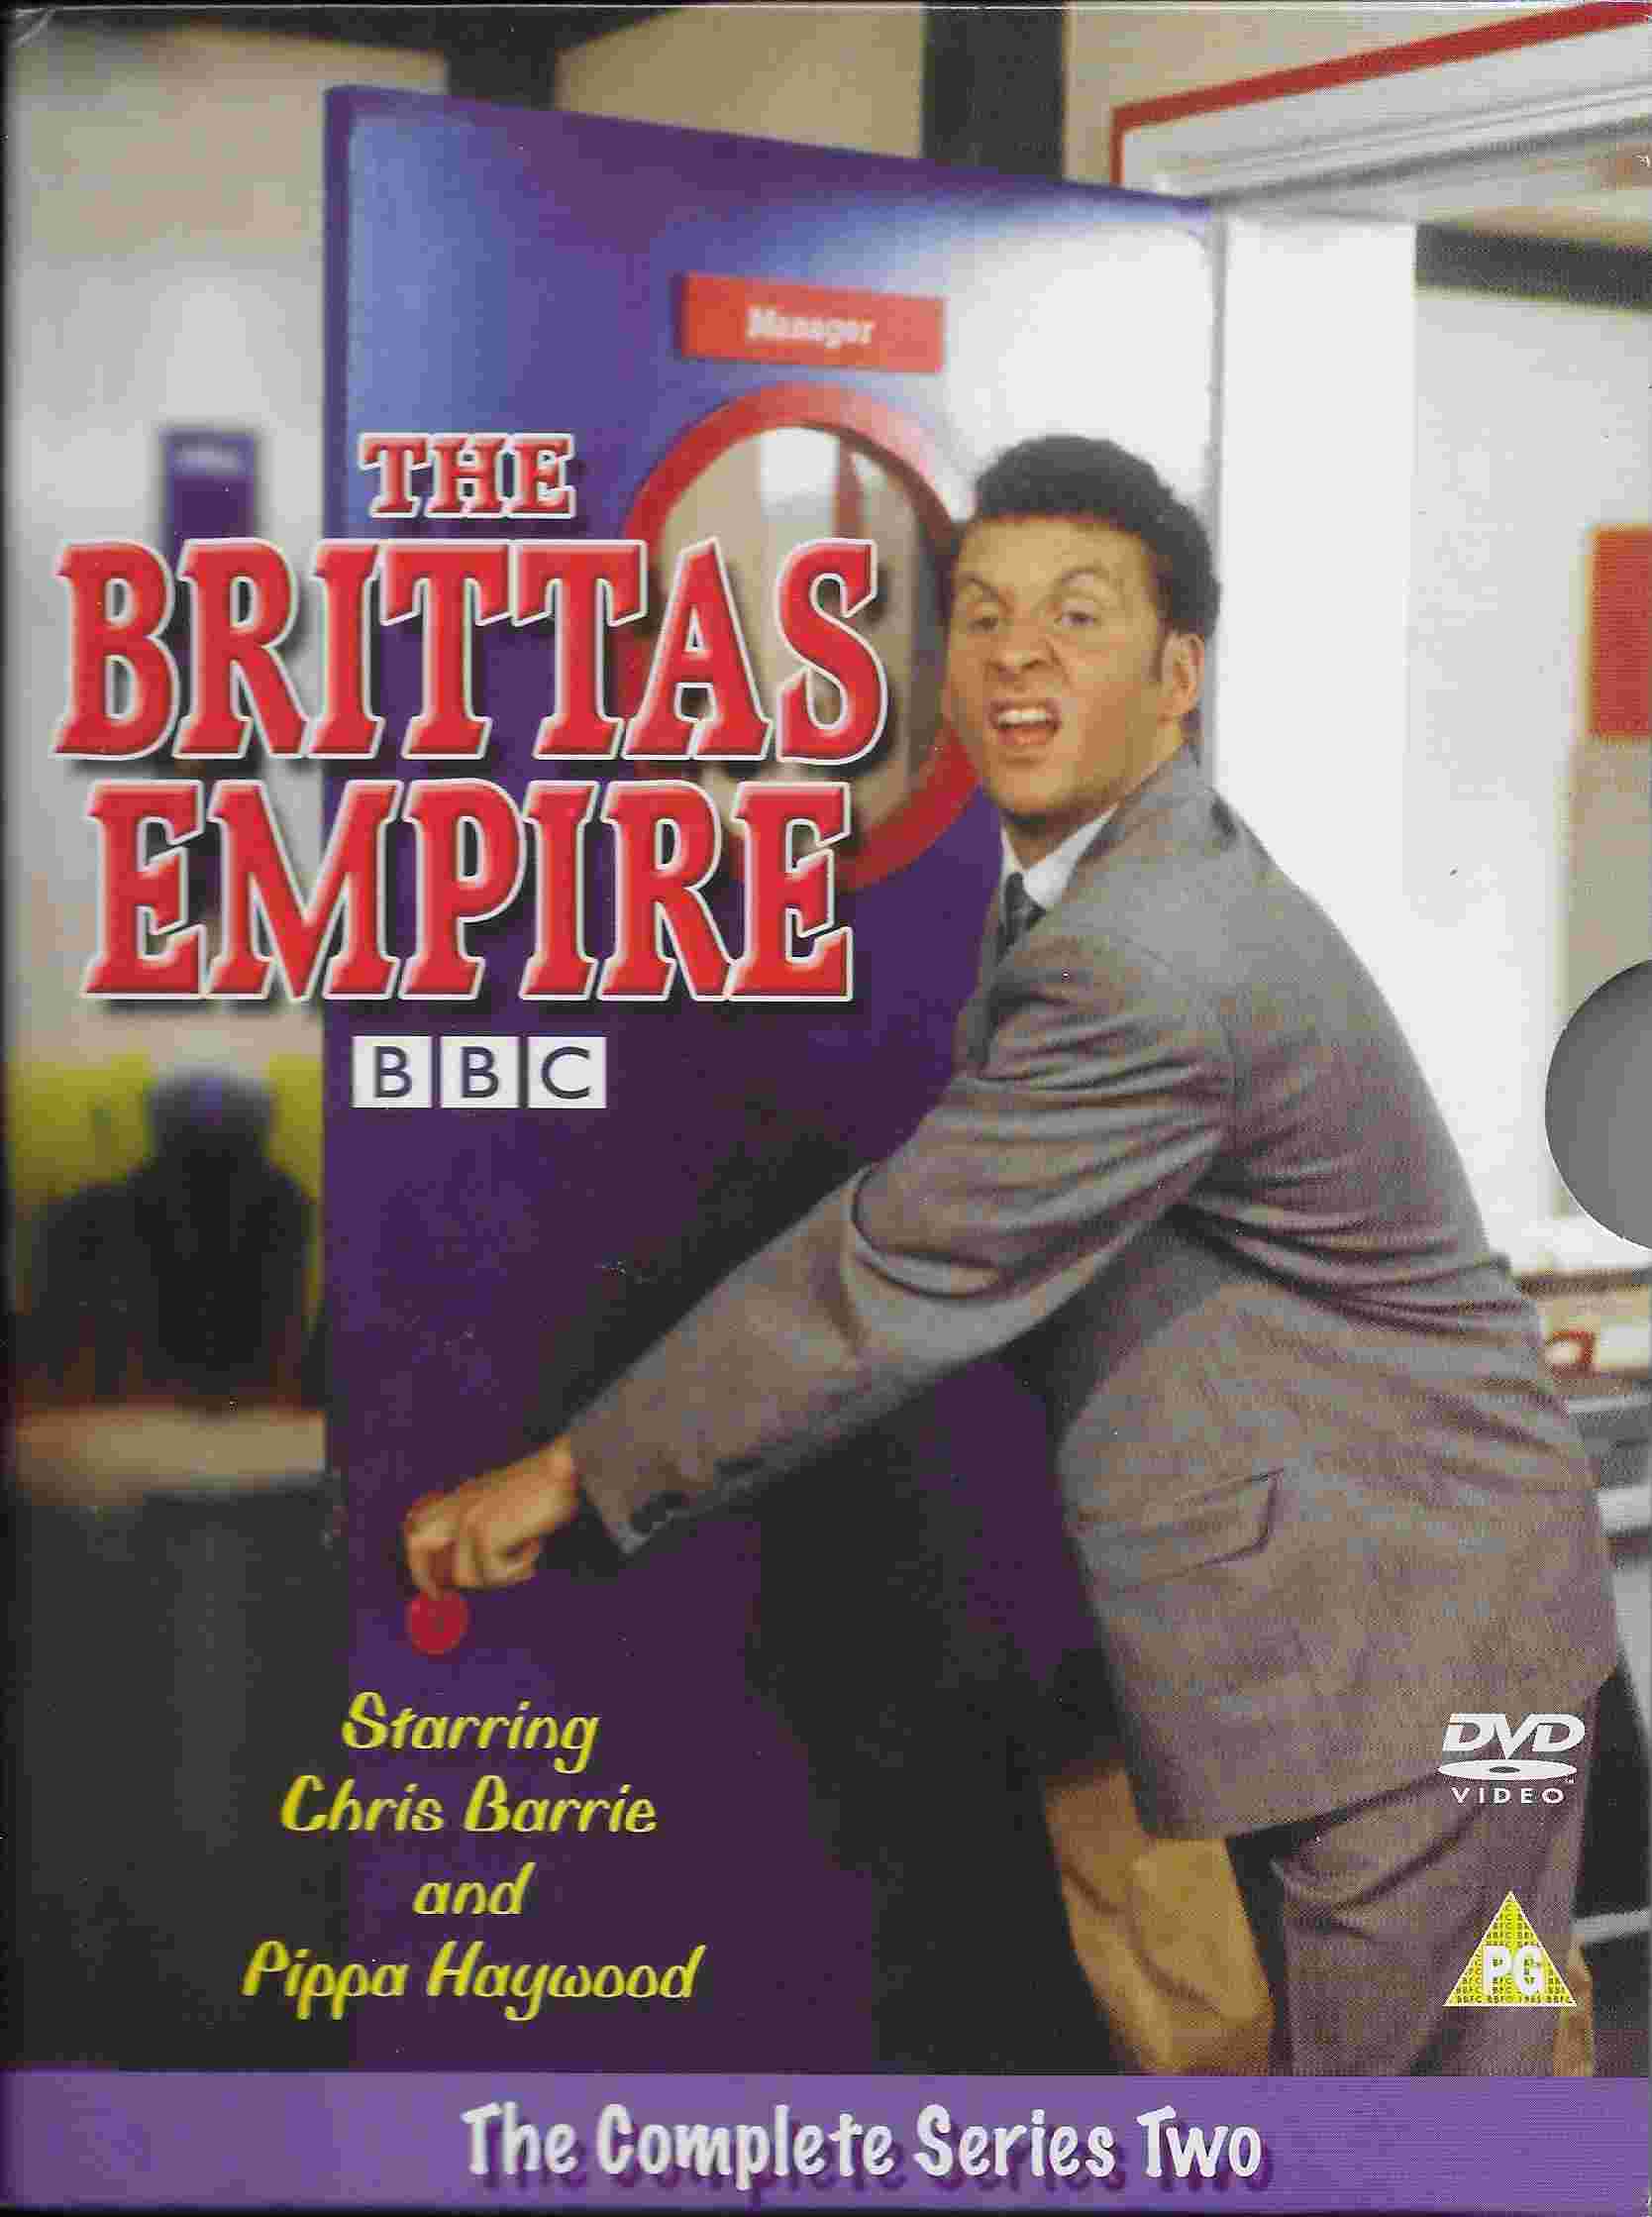 Picture of The Brittas empire - Series 2 by artist Richard Fegen / Andrew Norriss from the BBC dvds - Records and Tapes library